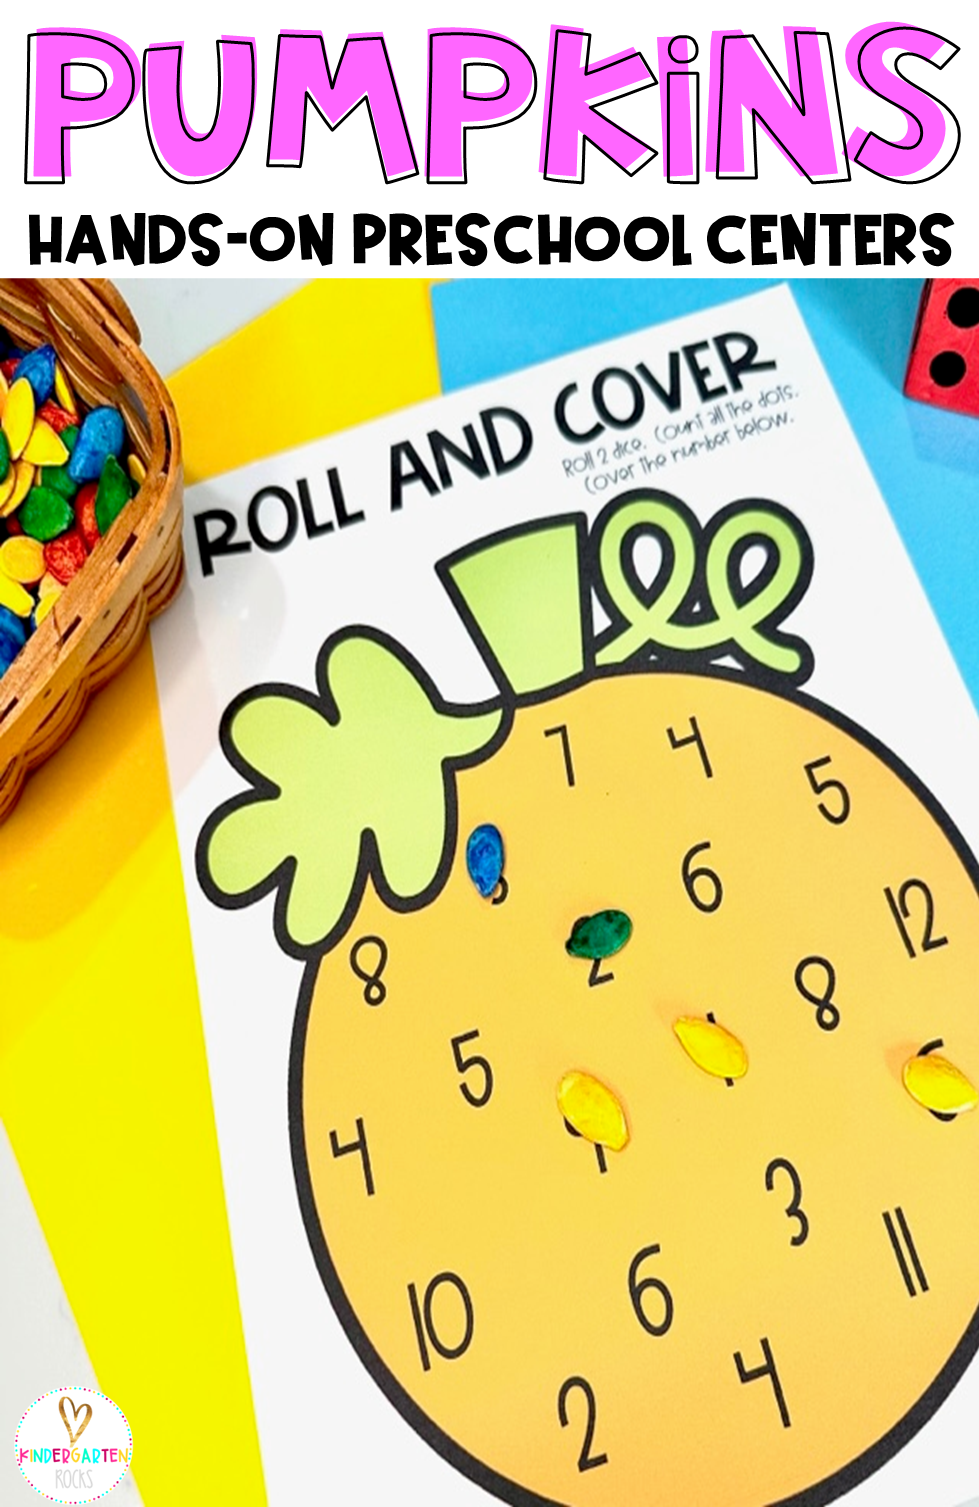 Are you looking for fun fall themed pumpkin math and literacy centers or morning bin activities that you can prep quickly for your preschool classroom? Then you will love Pumpkin Centers and Activities for Preschool.